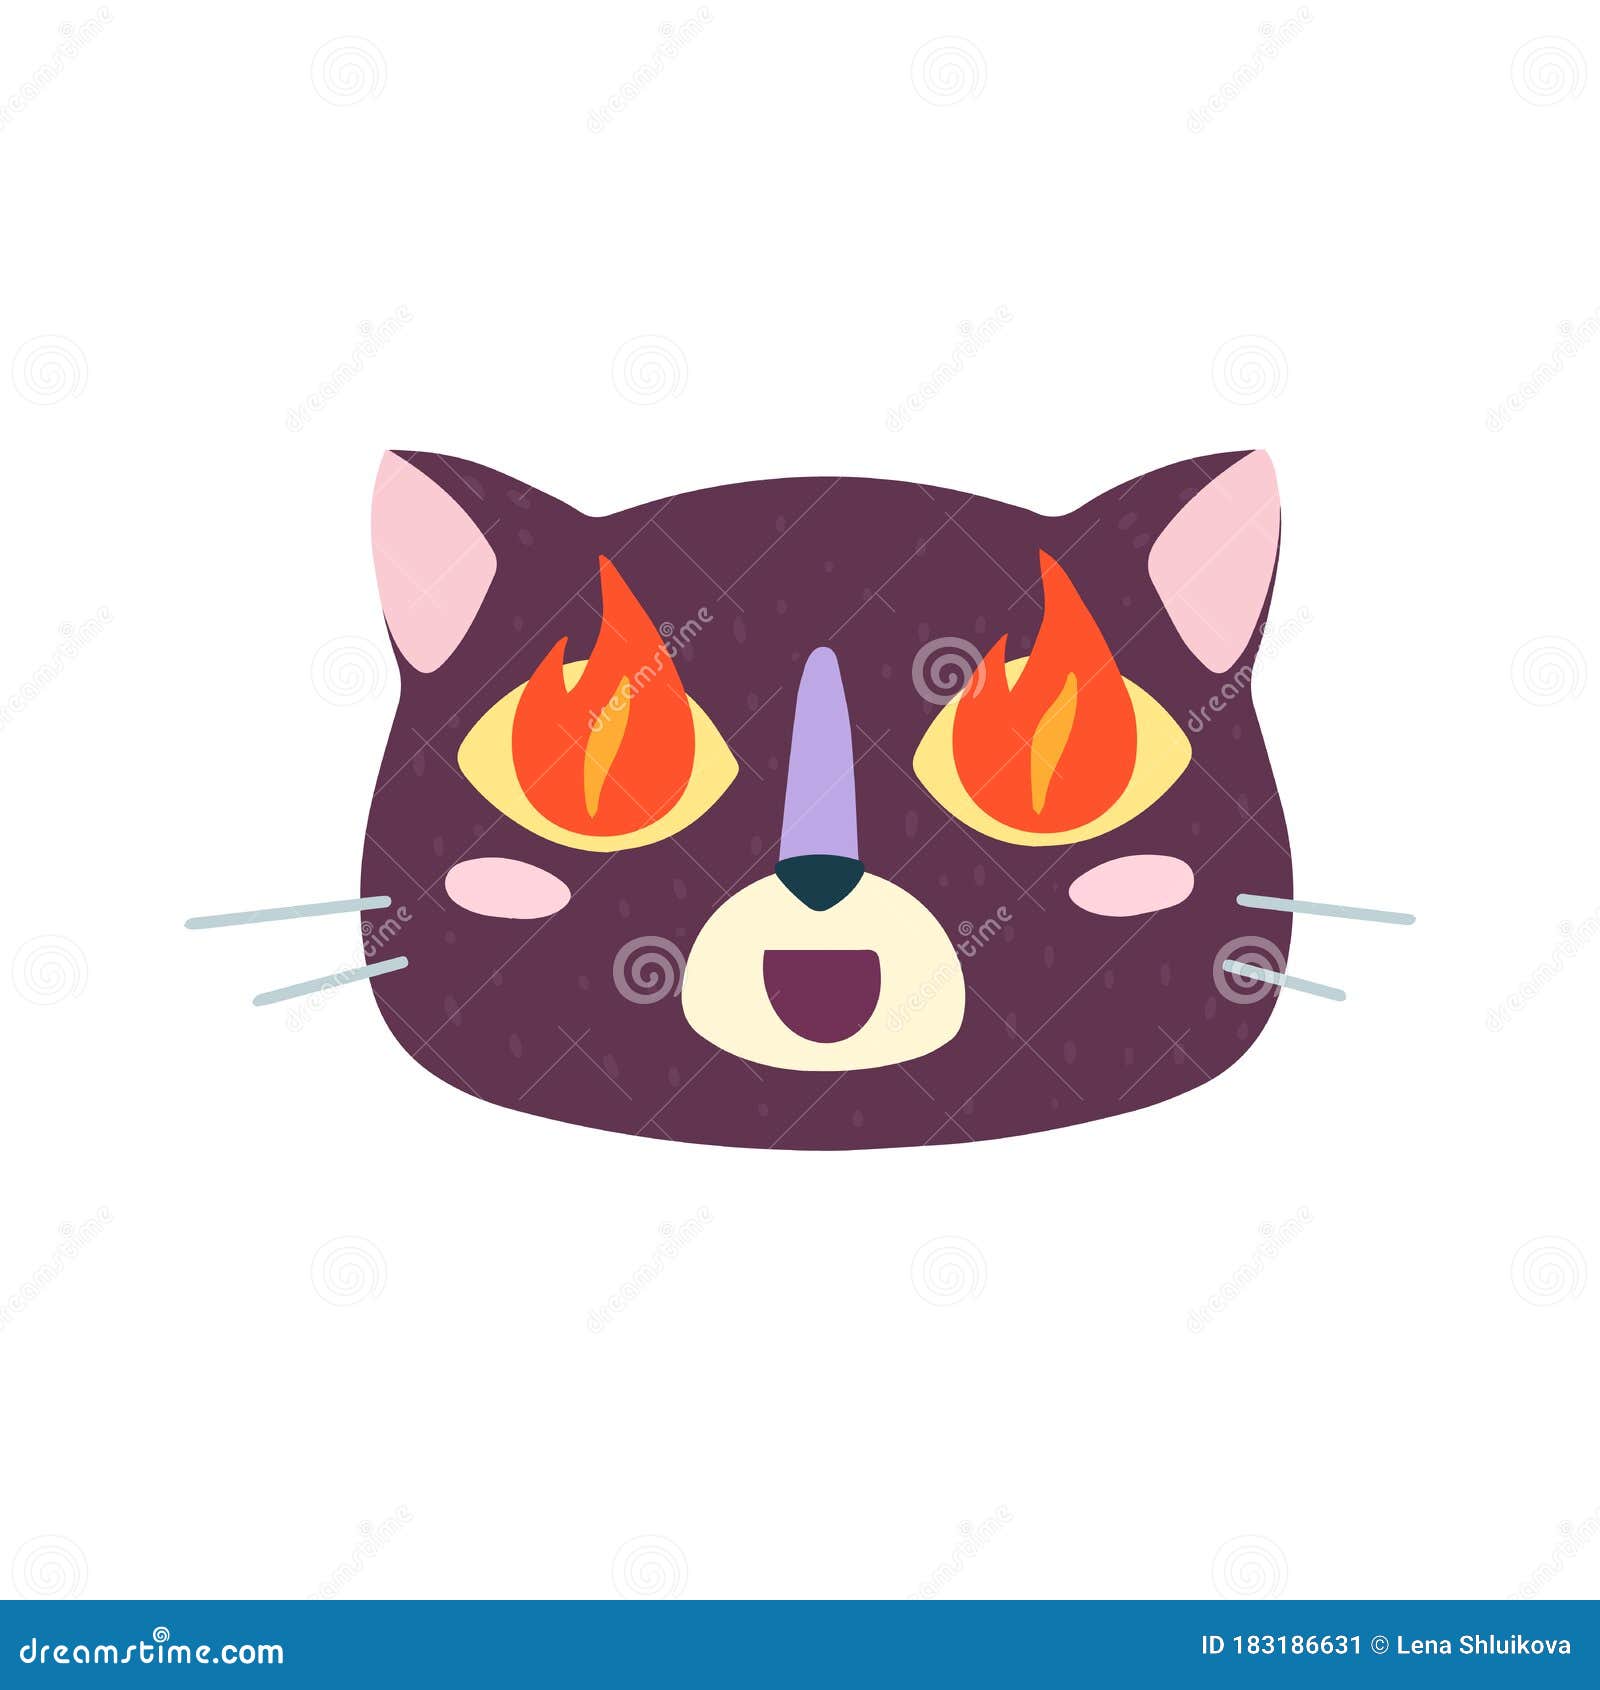 Highlights Stories Cover, Avatar, Emoji: Passion, Fire in the Eyes. Cute  Funny Cat Face Stock Vector - Illustration of hand, amusing: 183186631